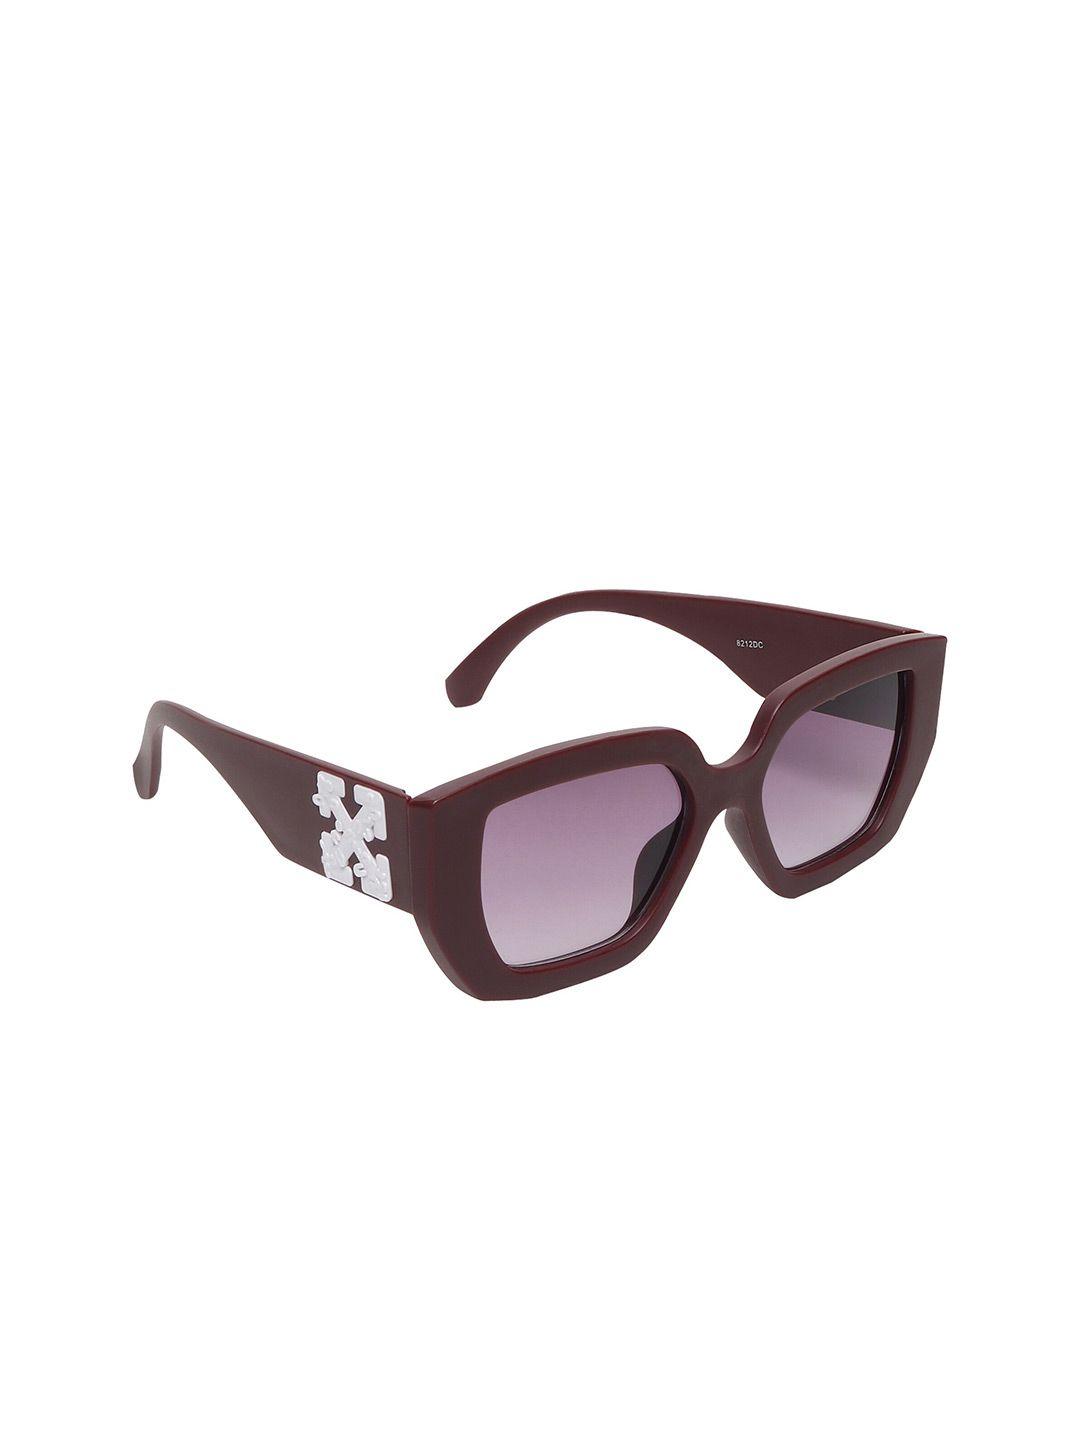 swiss design unisex browline sunglasses with uv protected lens